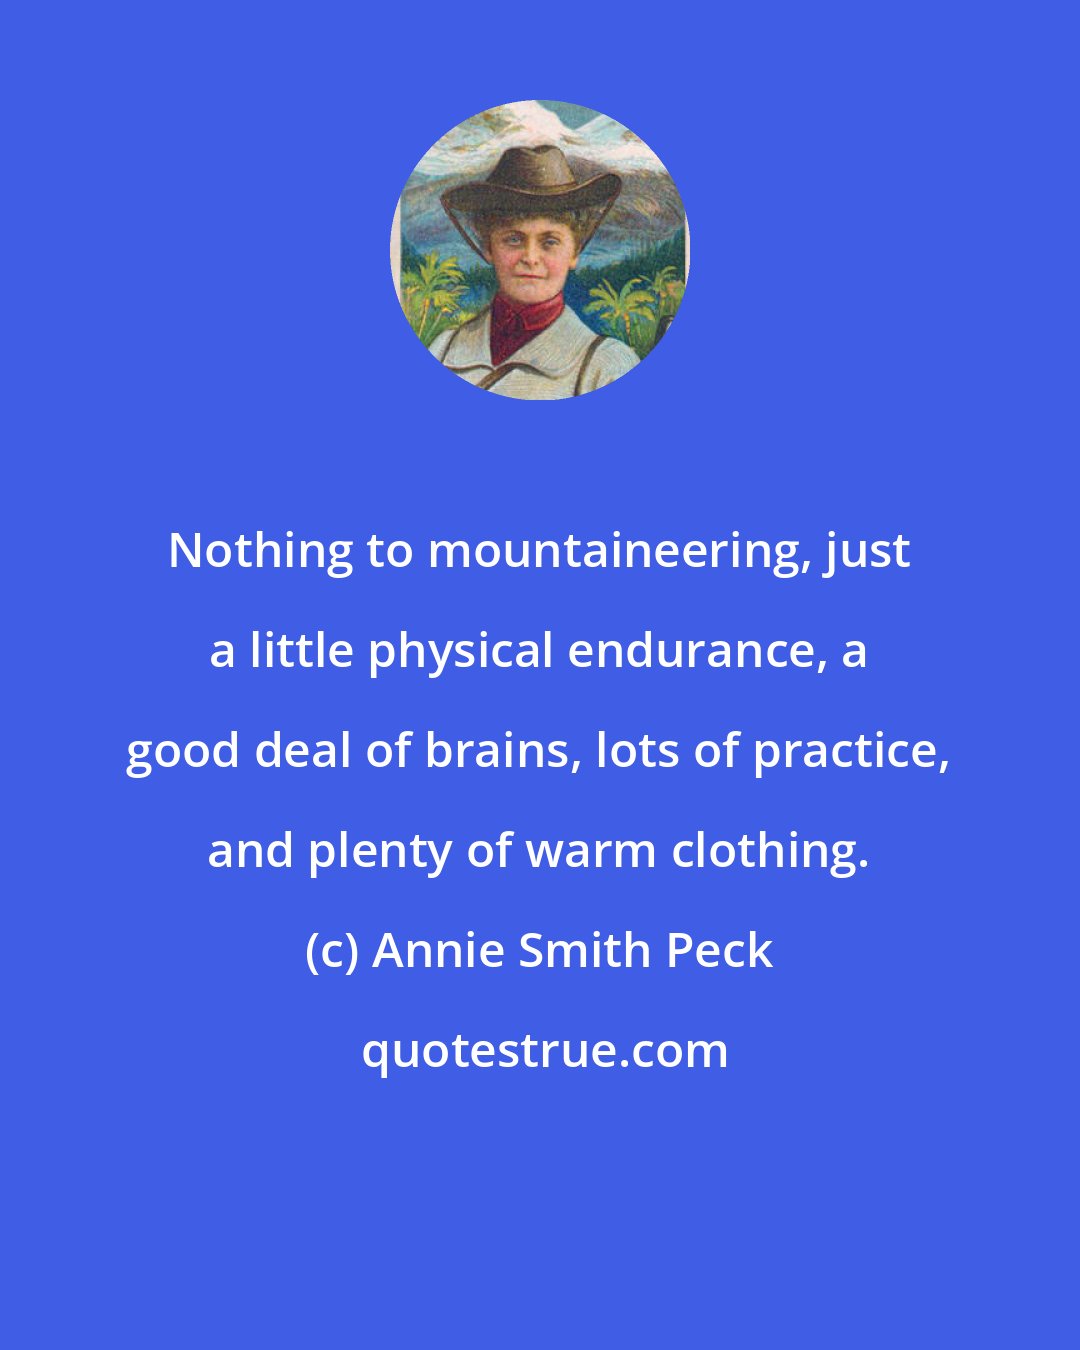 Annie Smith Peck: Nothing to mountaineering, just a little physical endurance, a good deal of brains, lots of practice, and plenty of warm clothing.